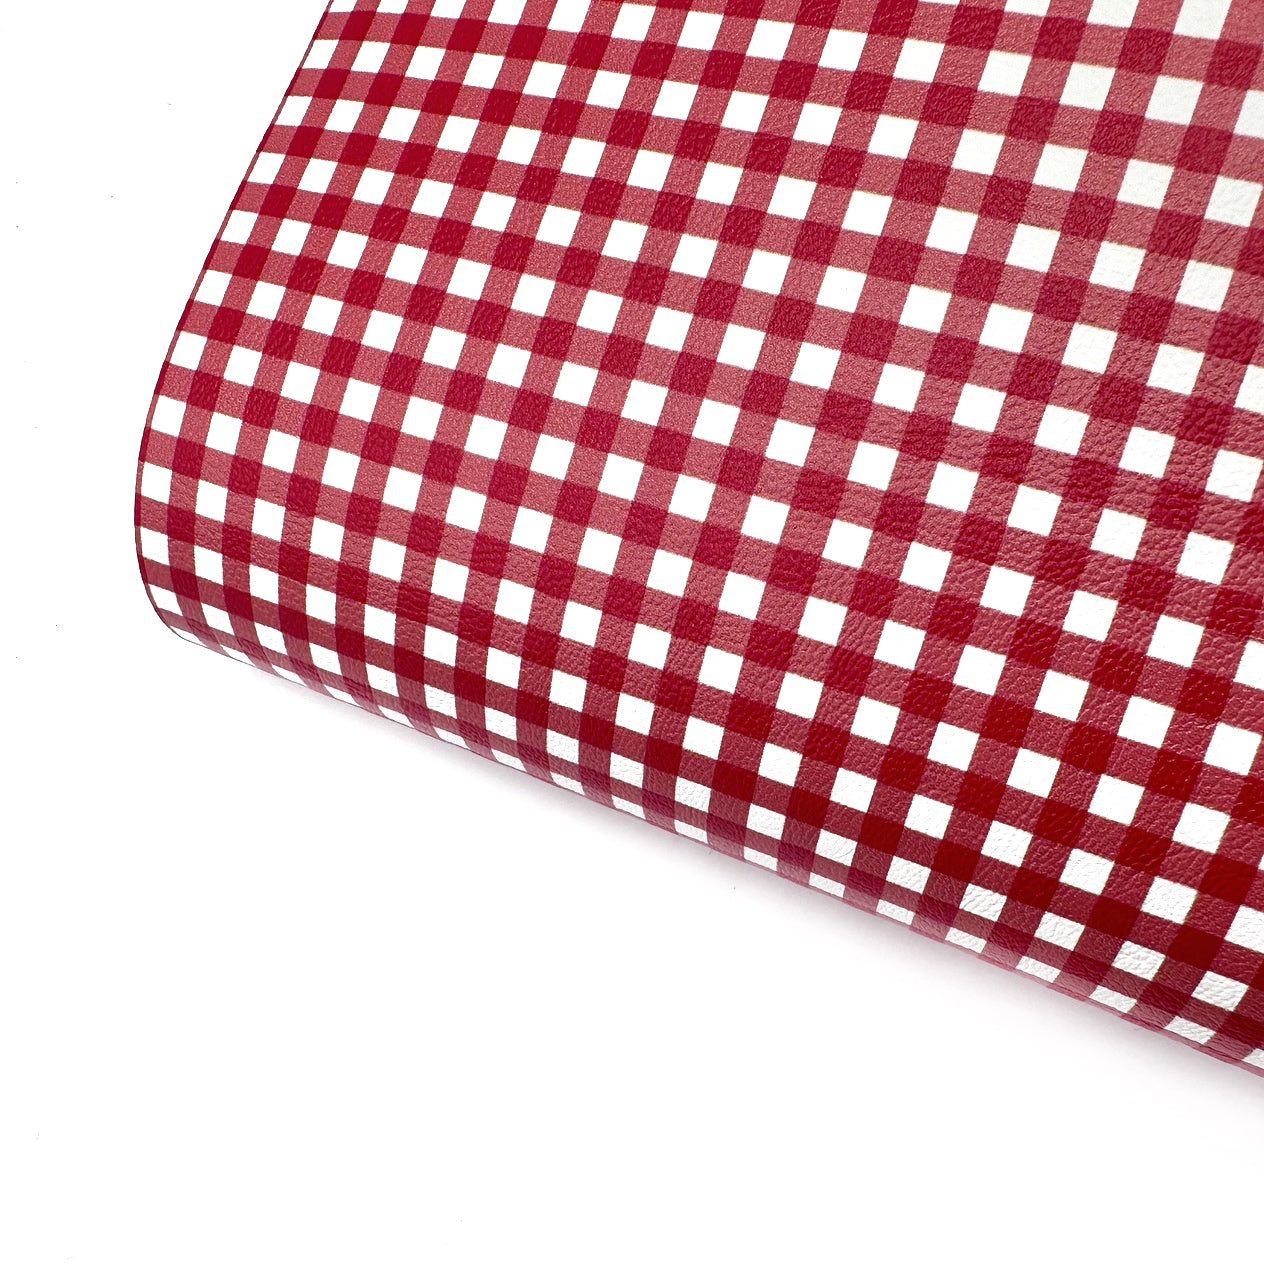 Red Gingham Standard Premium Faux Leather Fabric Sheets